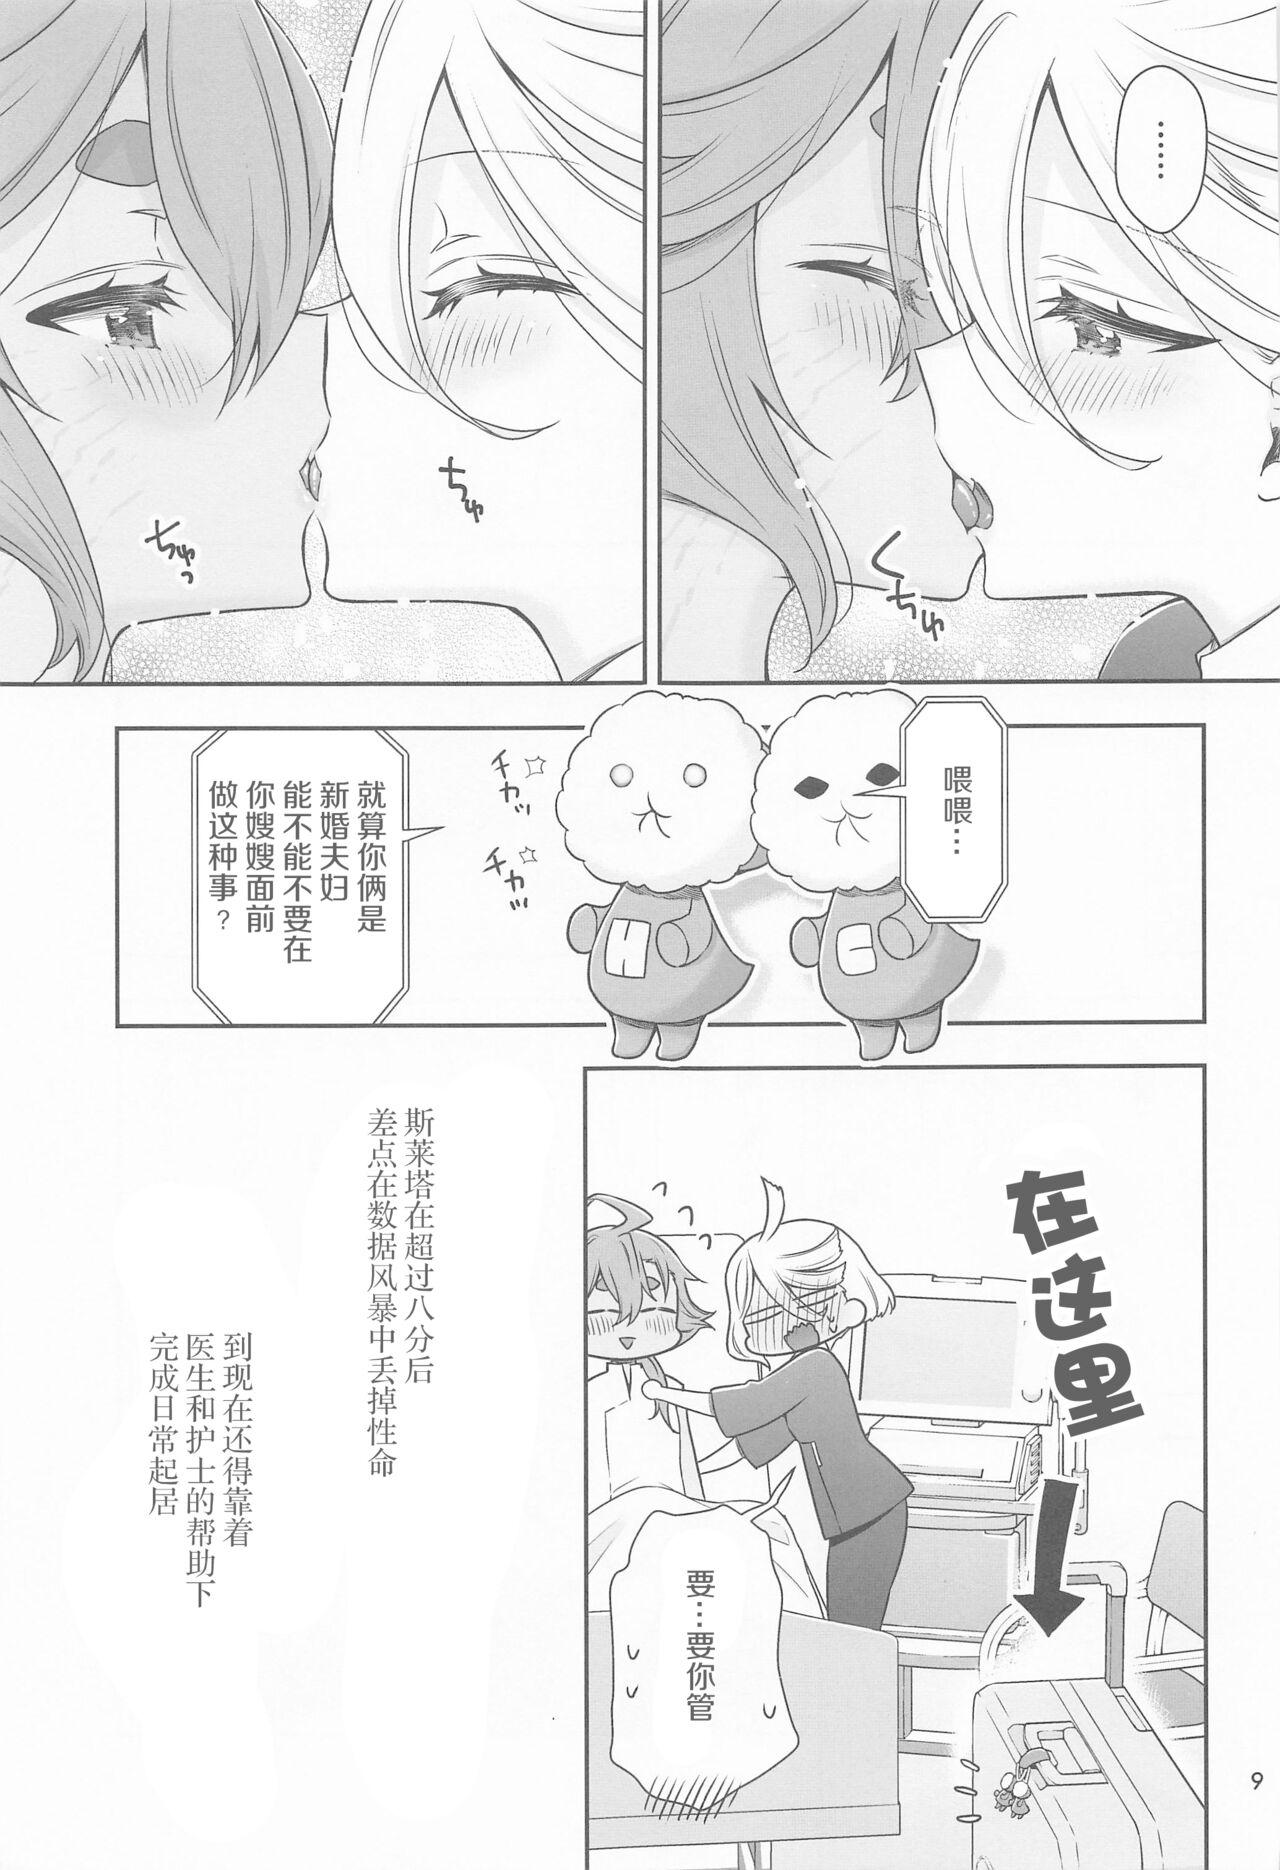 Gostosa Shukufuku no Hi | 祝福之日 - Mobile suit gundam the witch from mercury Orgasms - Page 9